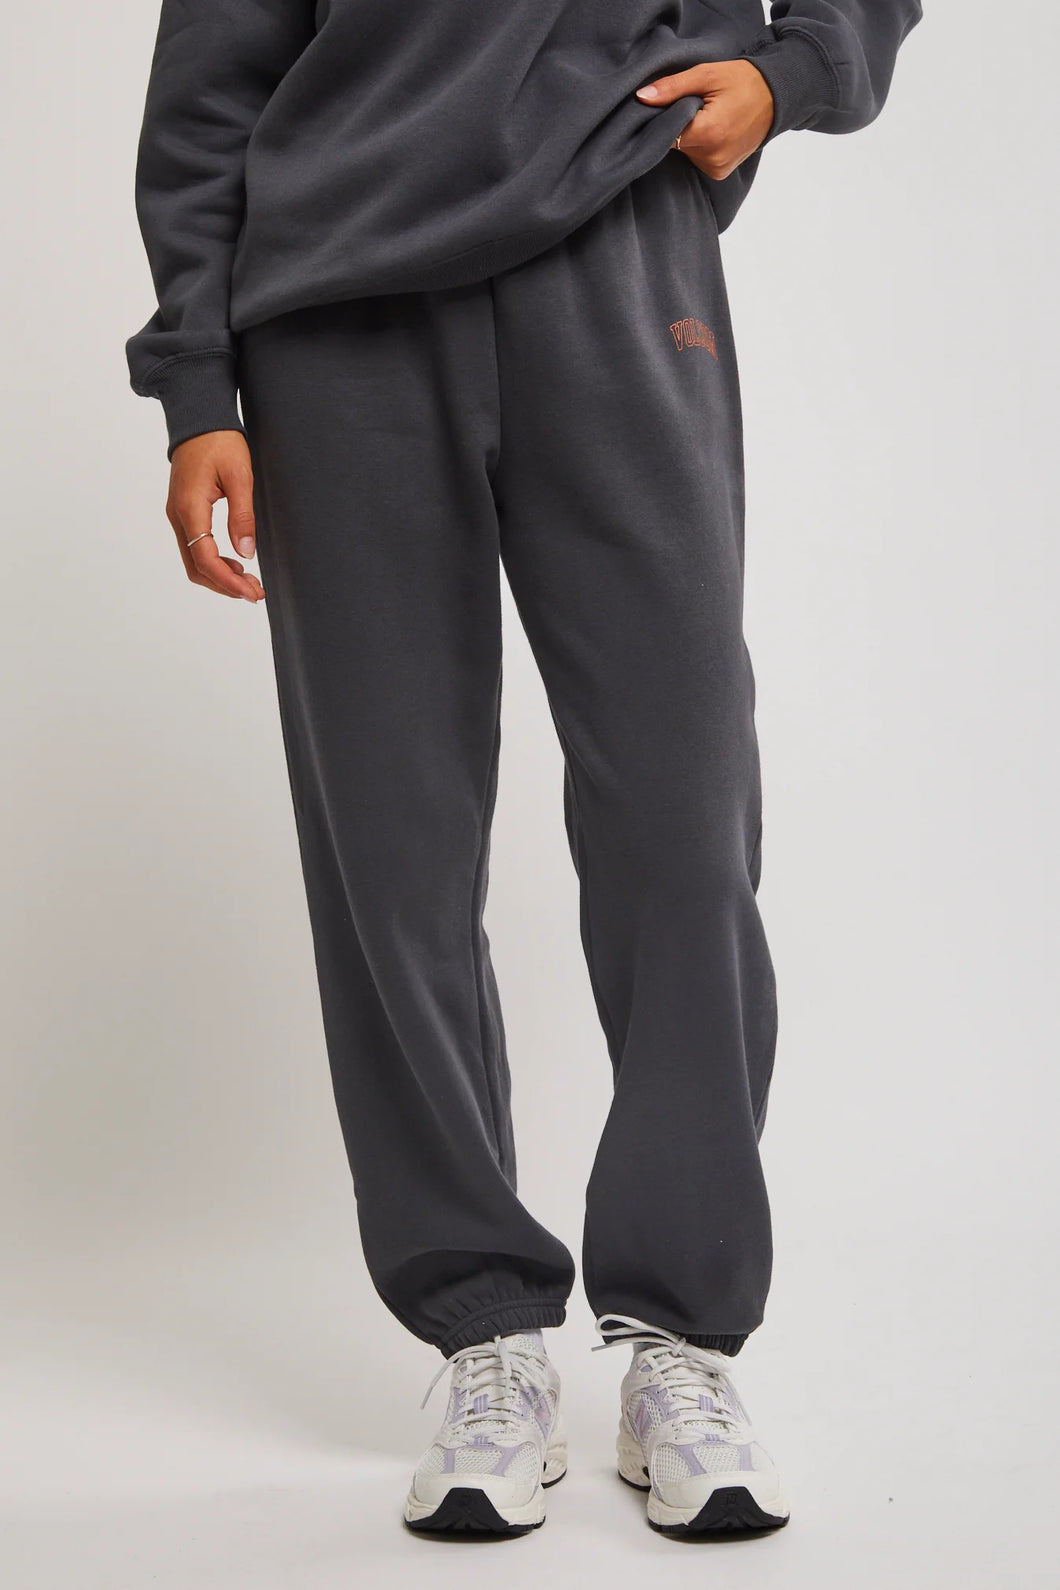 GET MORE TRACKIE - BUNDLE DEAL 2 FOR $100